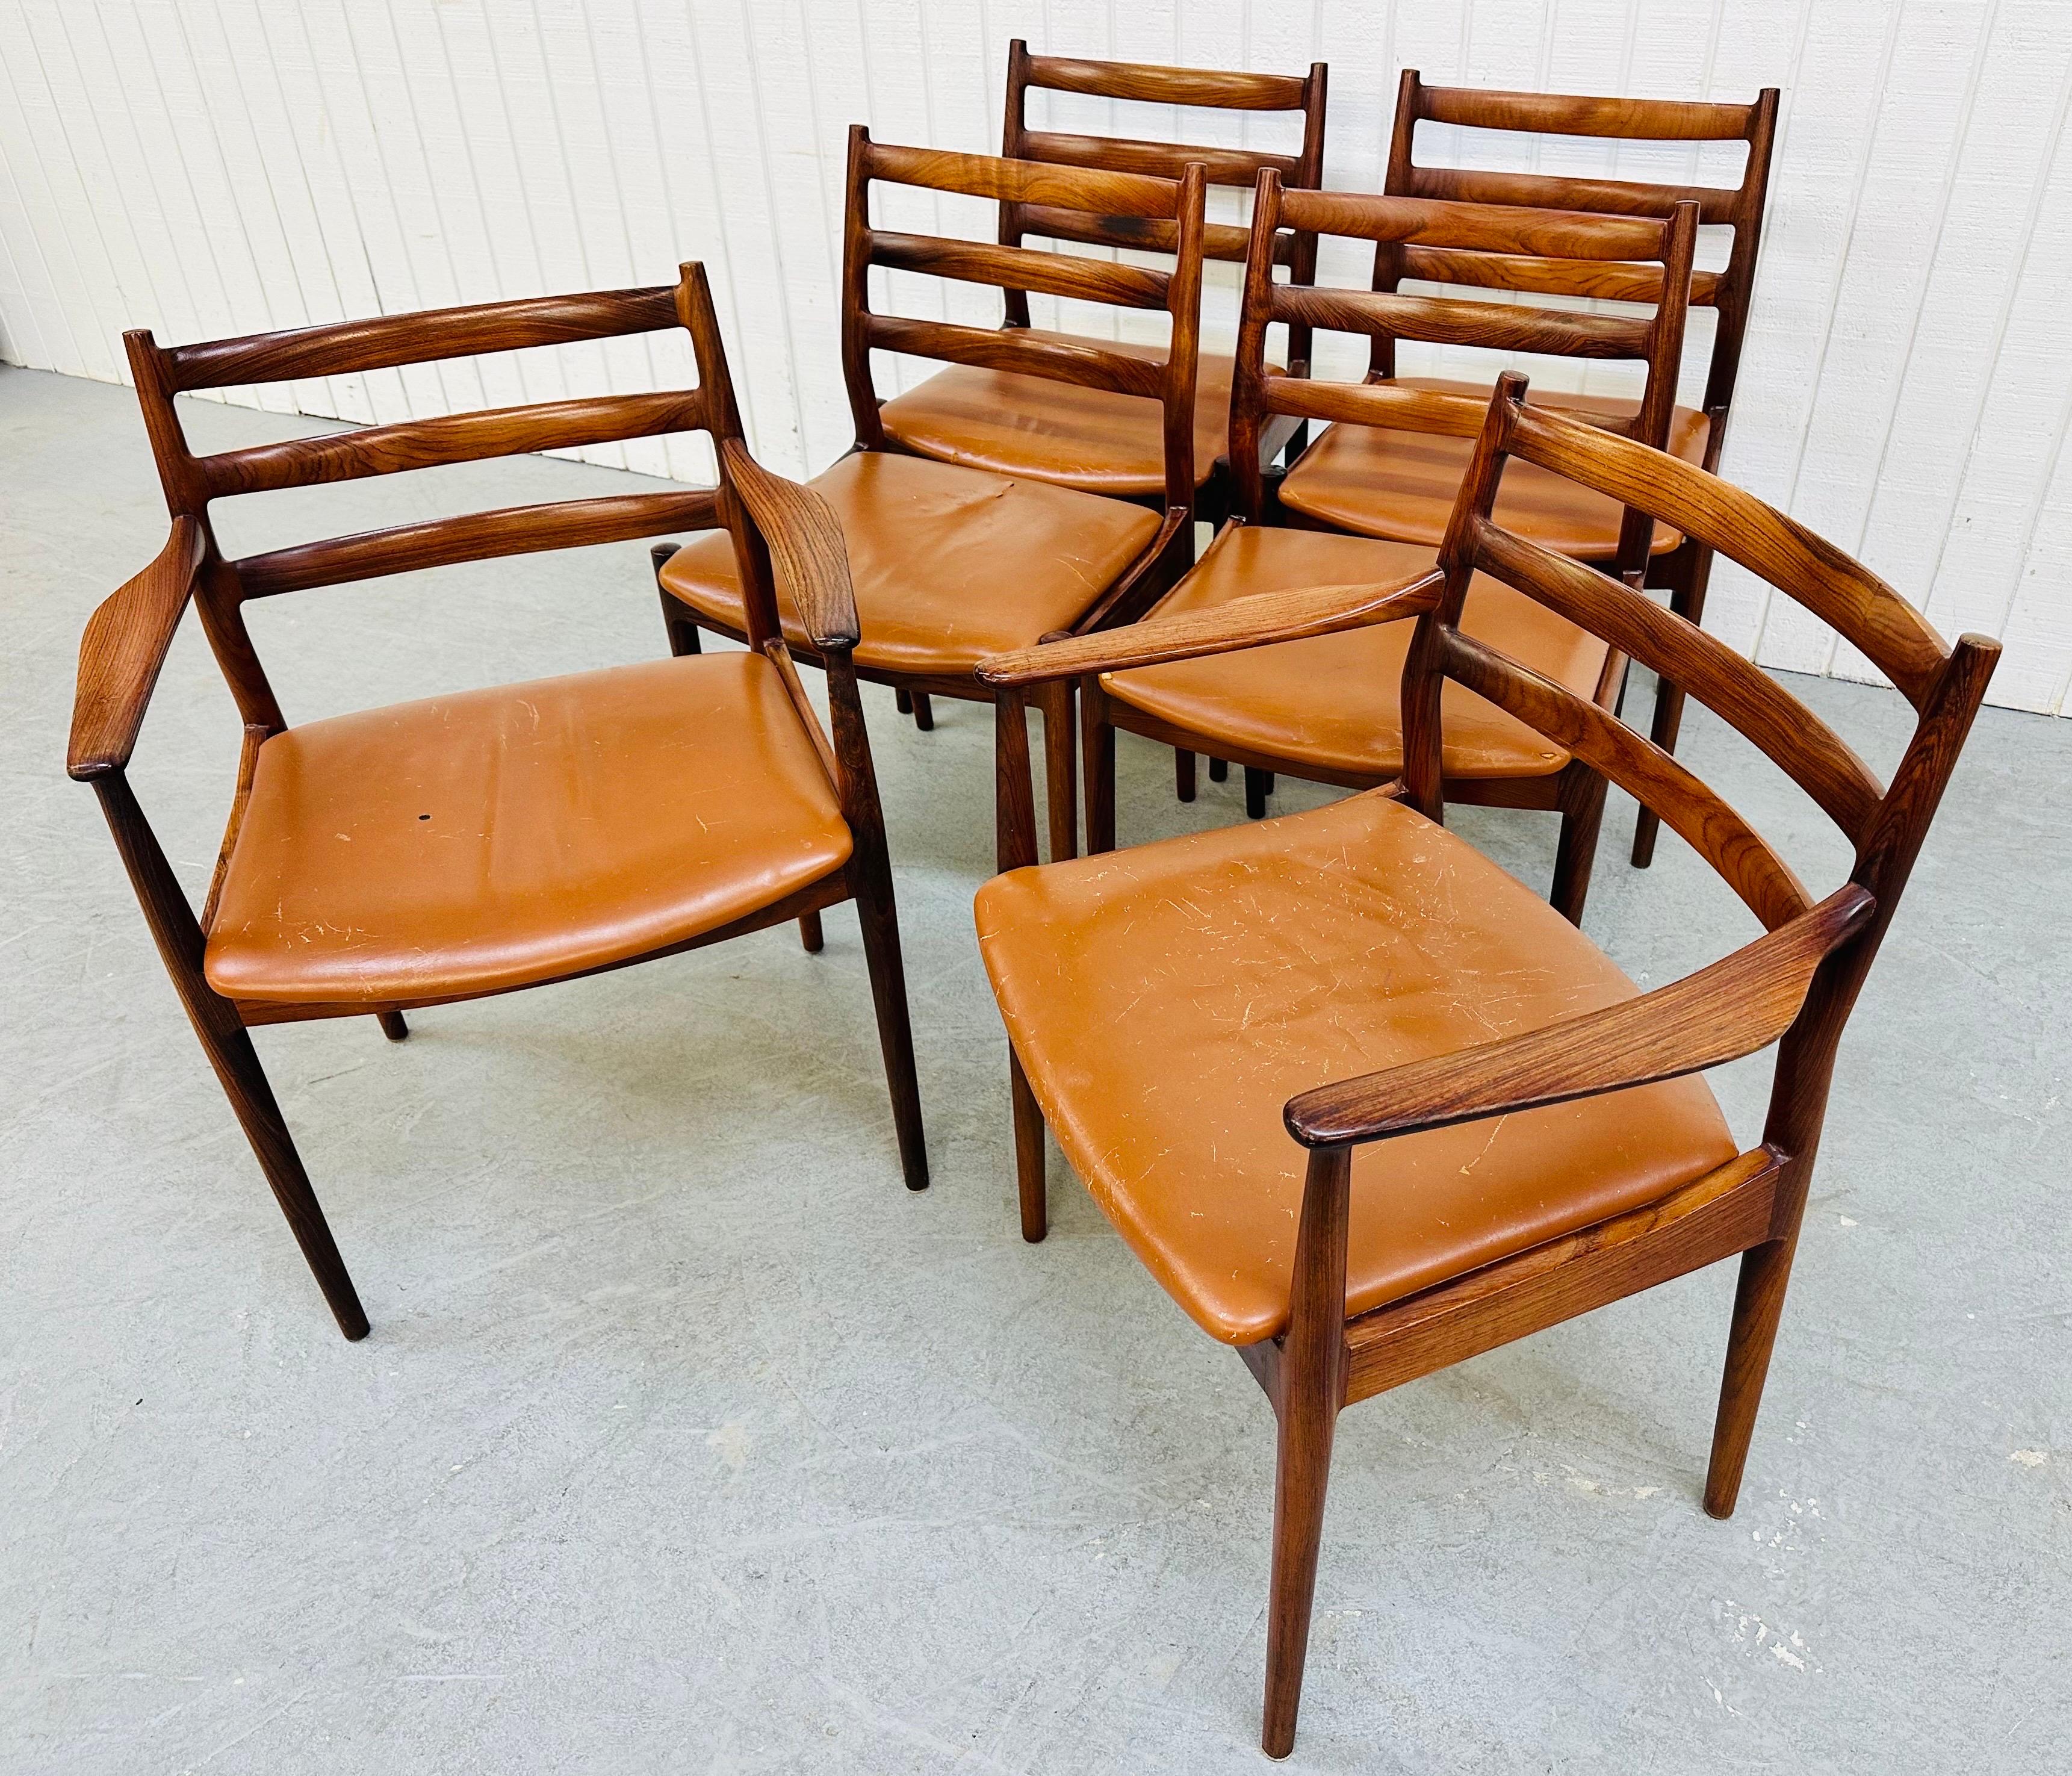 This listing is for a set of six Mid-Century Modern France & Son Danish Rosewood Dining Chairs. Featuring two arm chairs, four straight chairs, ladder backs, solid rosewood frames, original leather upholstery, and a beautiful rosewood finish. This